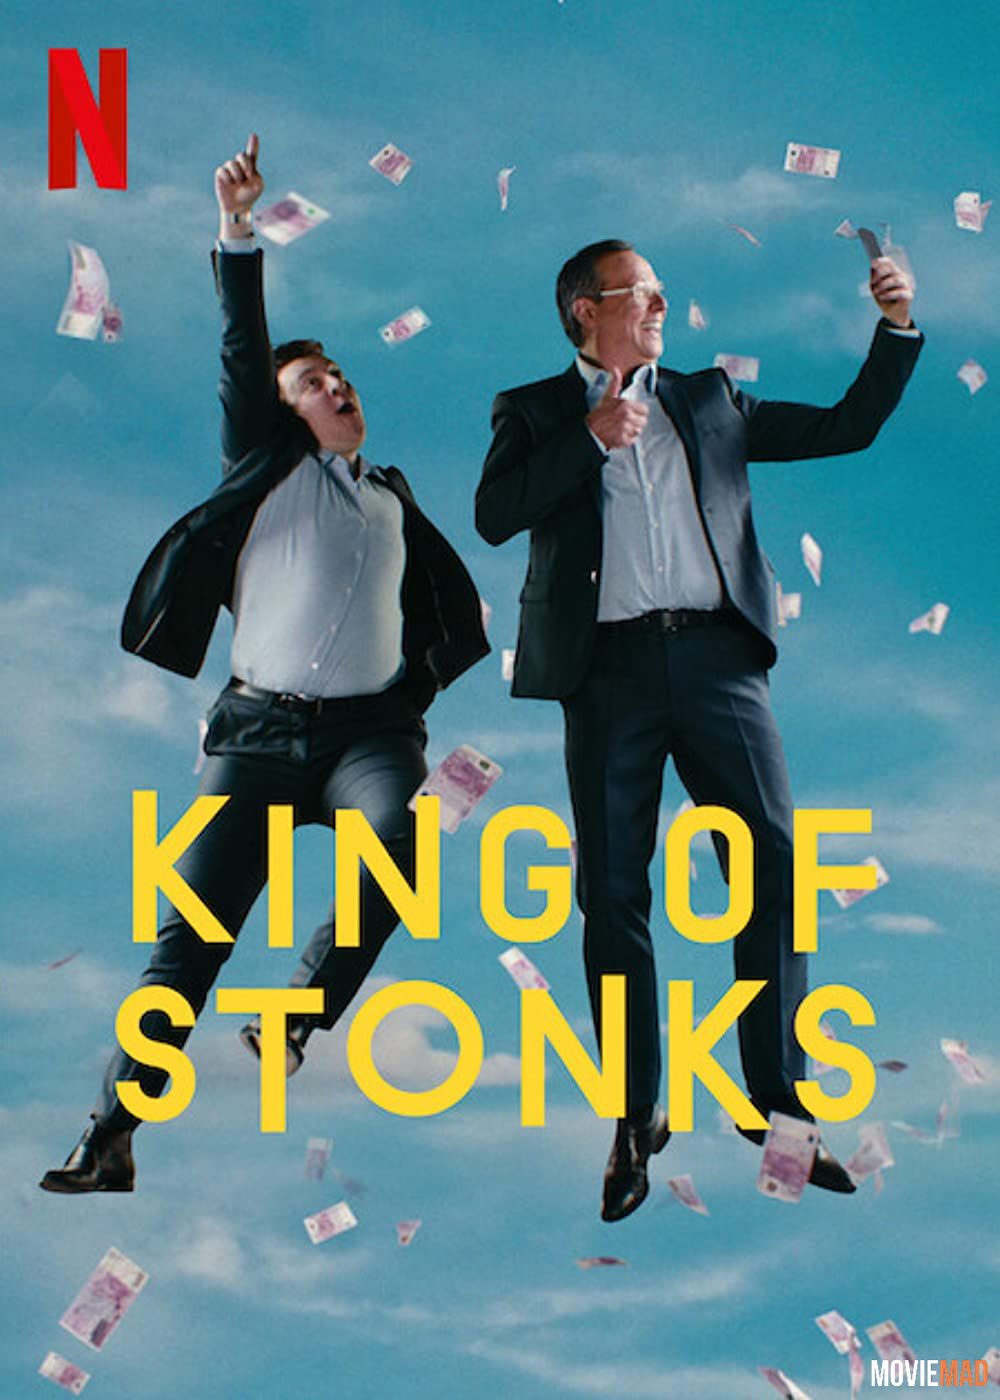 full moviesKing of Stonks S01 (2022) Hindi Dubbed Complete NF Series HDRip 720p 480p